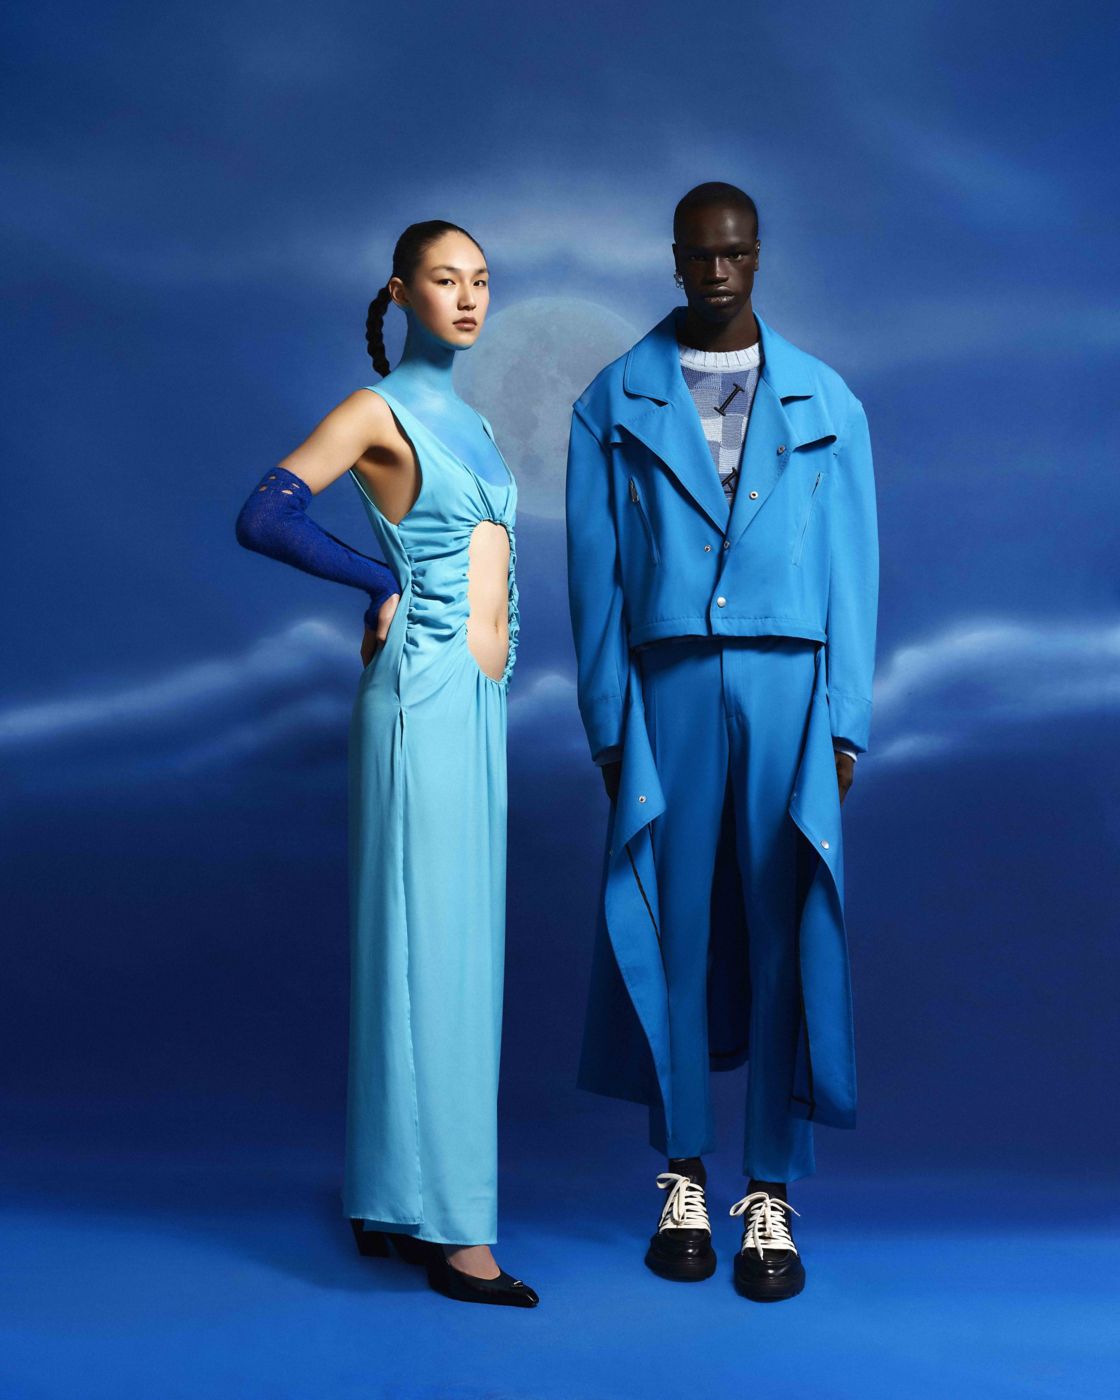 Two fashion models in all-blue setting.